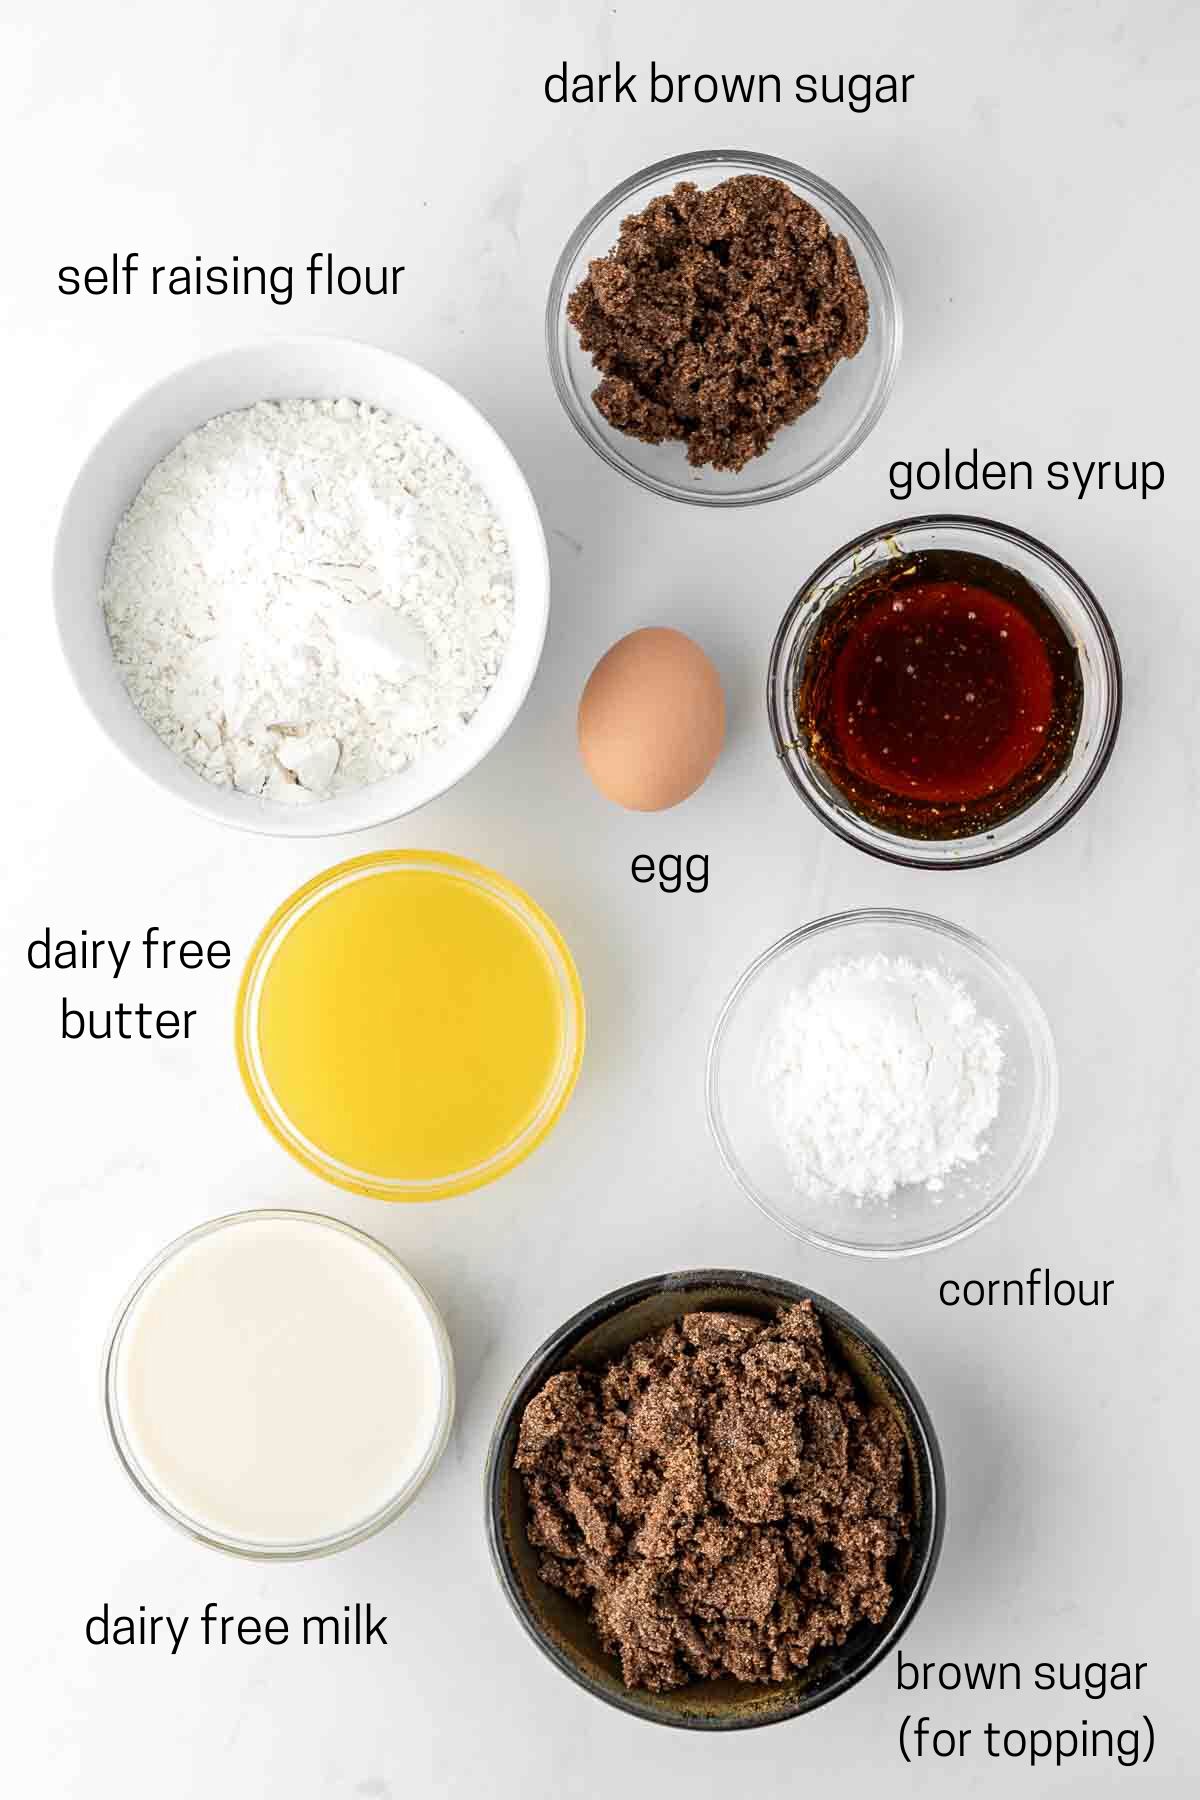 all ingredients needed to make butterscotch pudding laid out in small bowls.